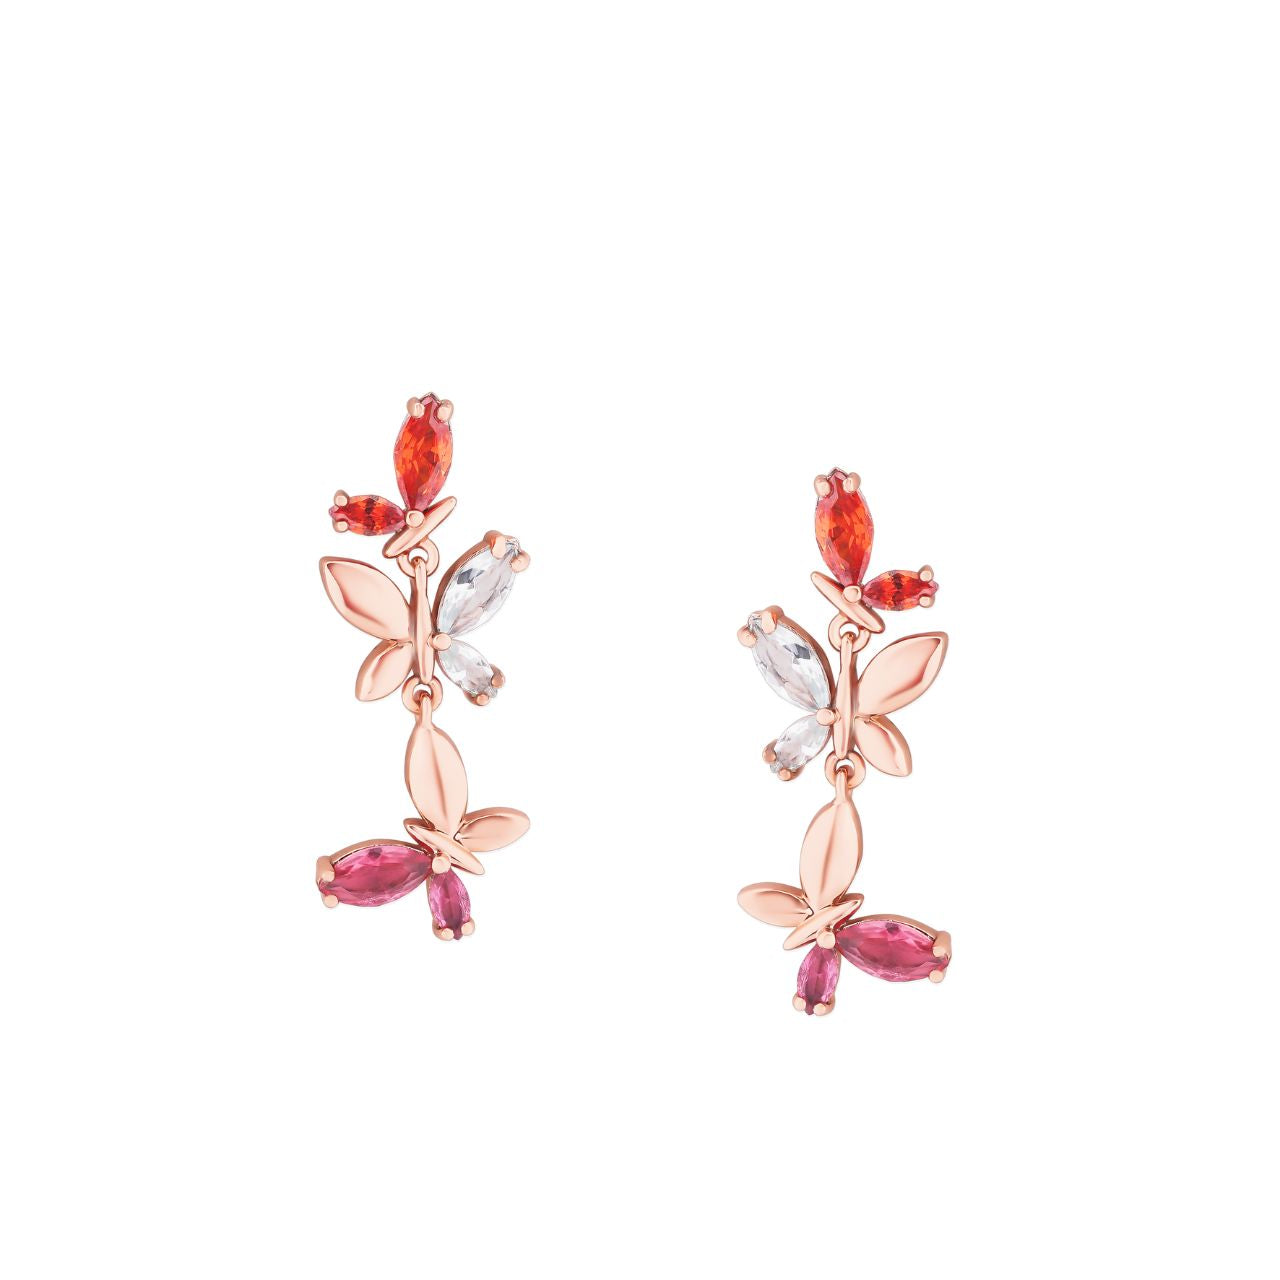 Tipperary Crystal Butterfly Rose Gold 3 Butterfly Drop Earrings  These Tipperary Crystal Butterfly Rose Gold Drop Earrings feature three gorgeous butterflies with cubic zirconia wings and rose gold plated bodies. Their intricate design and luxurious finish make them an eye-catching accessory for any outfit.